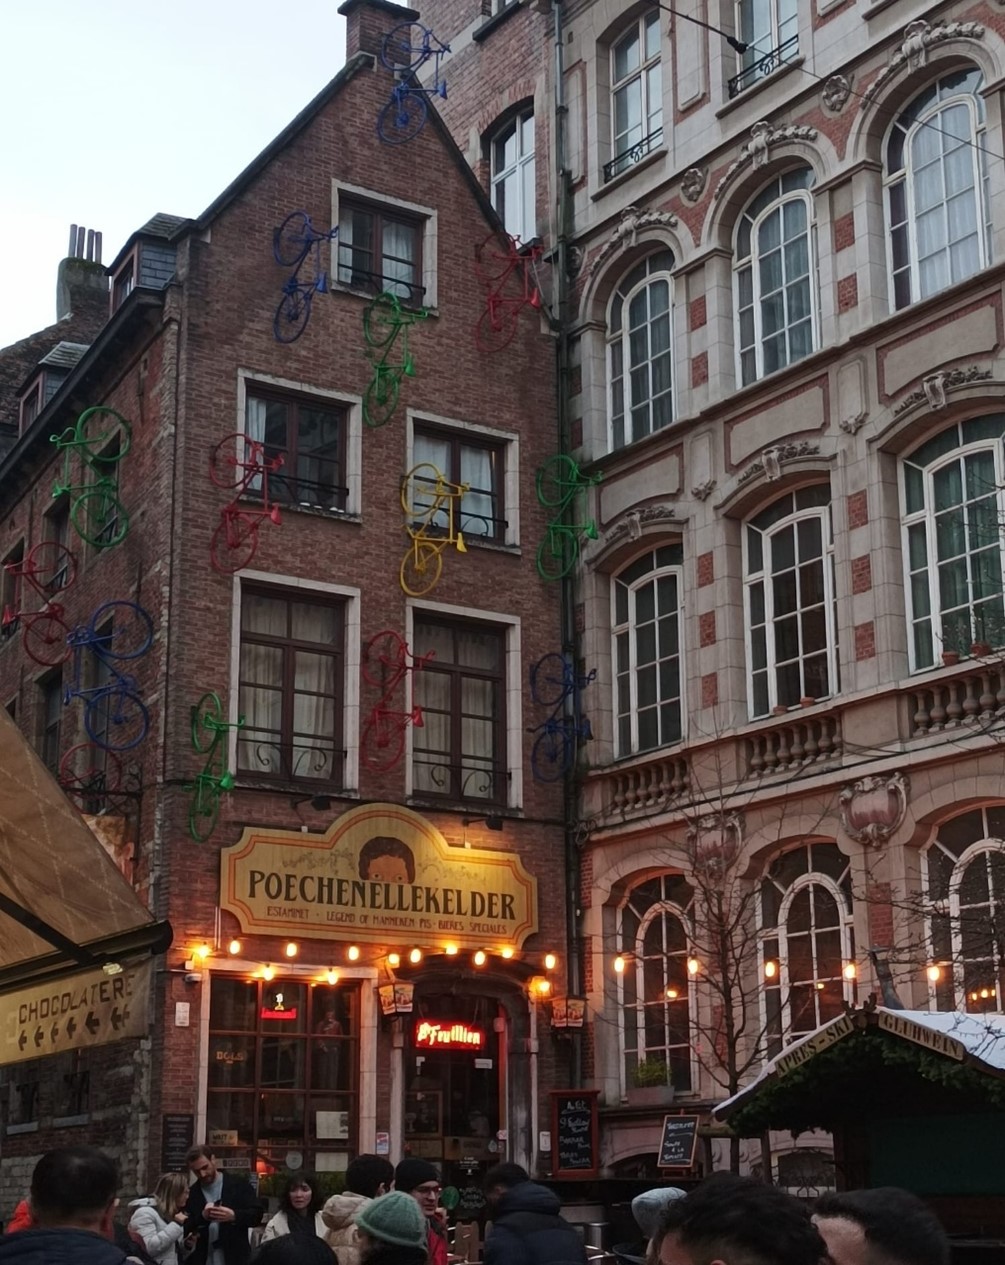 The atmosphere of Brussels city center's pedestrian street.